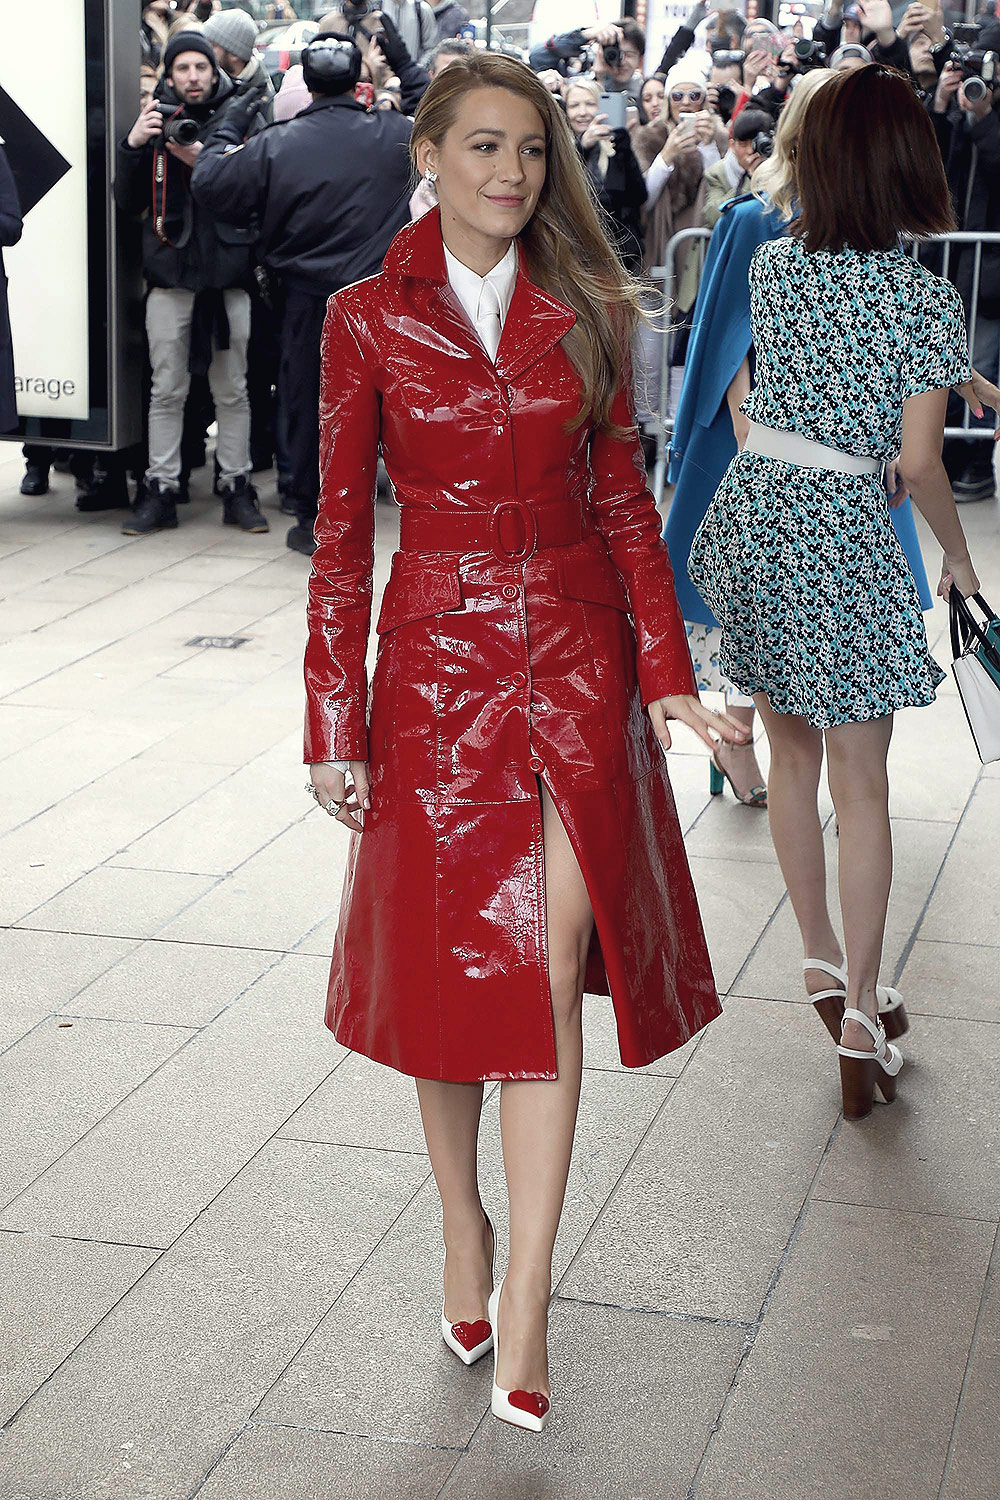 Blake Lively arrives at the Michael Kors show - Leather Celebrities